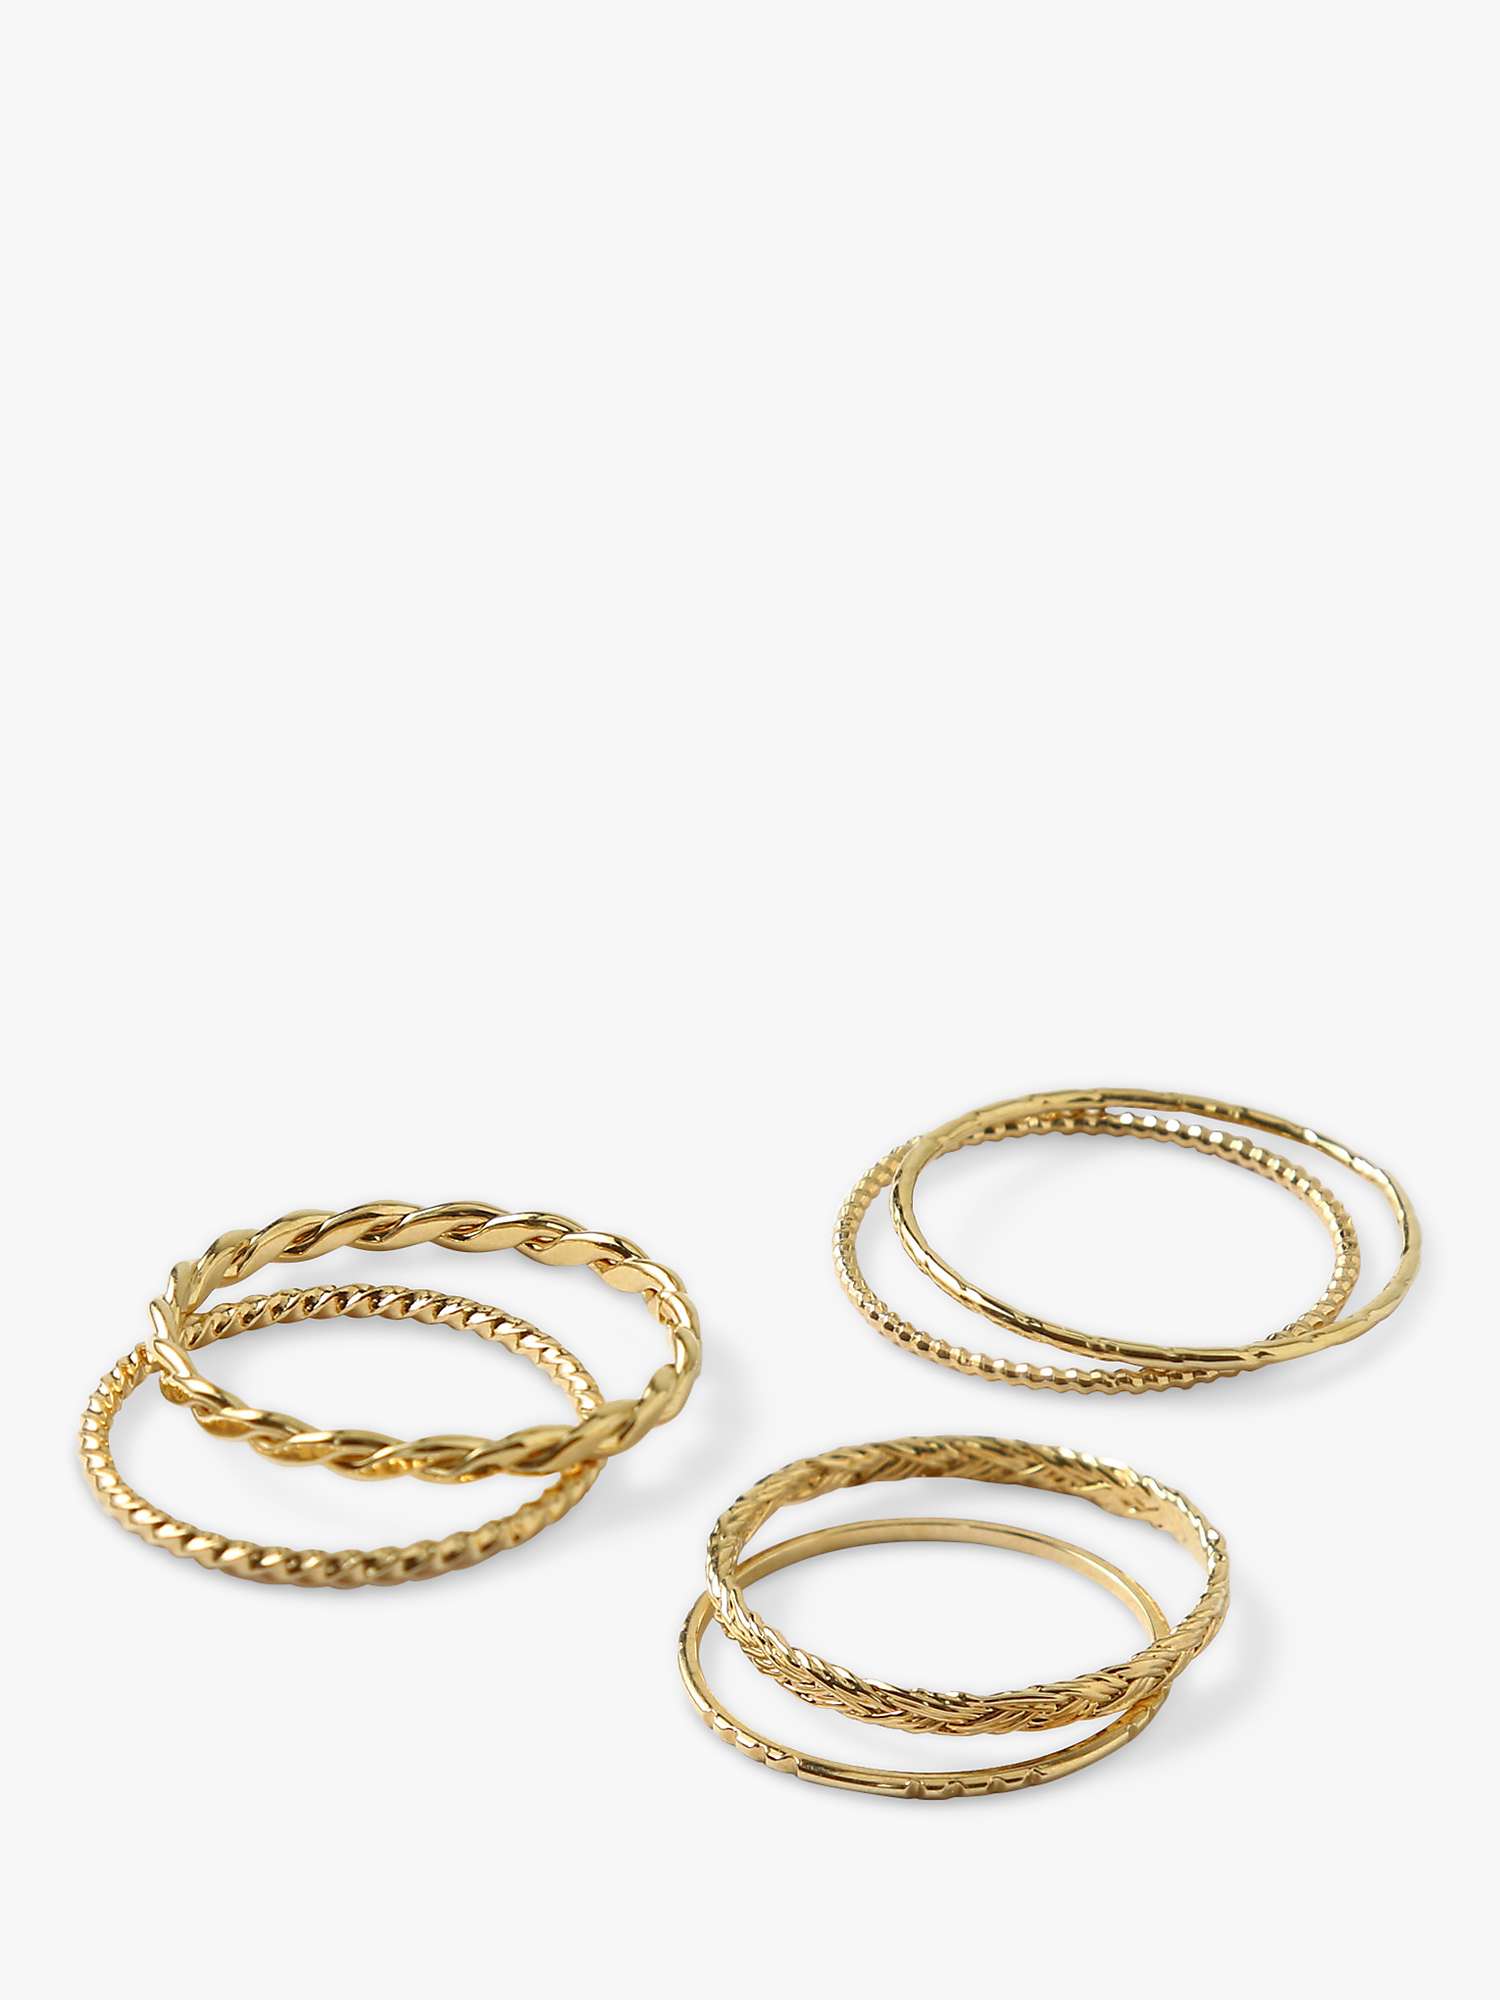 Buy Orelia Mixed Stacking Rings, Pack of 6, Pale Gold Online at johnlewis.com